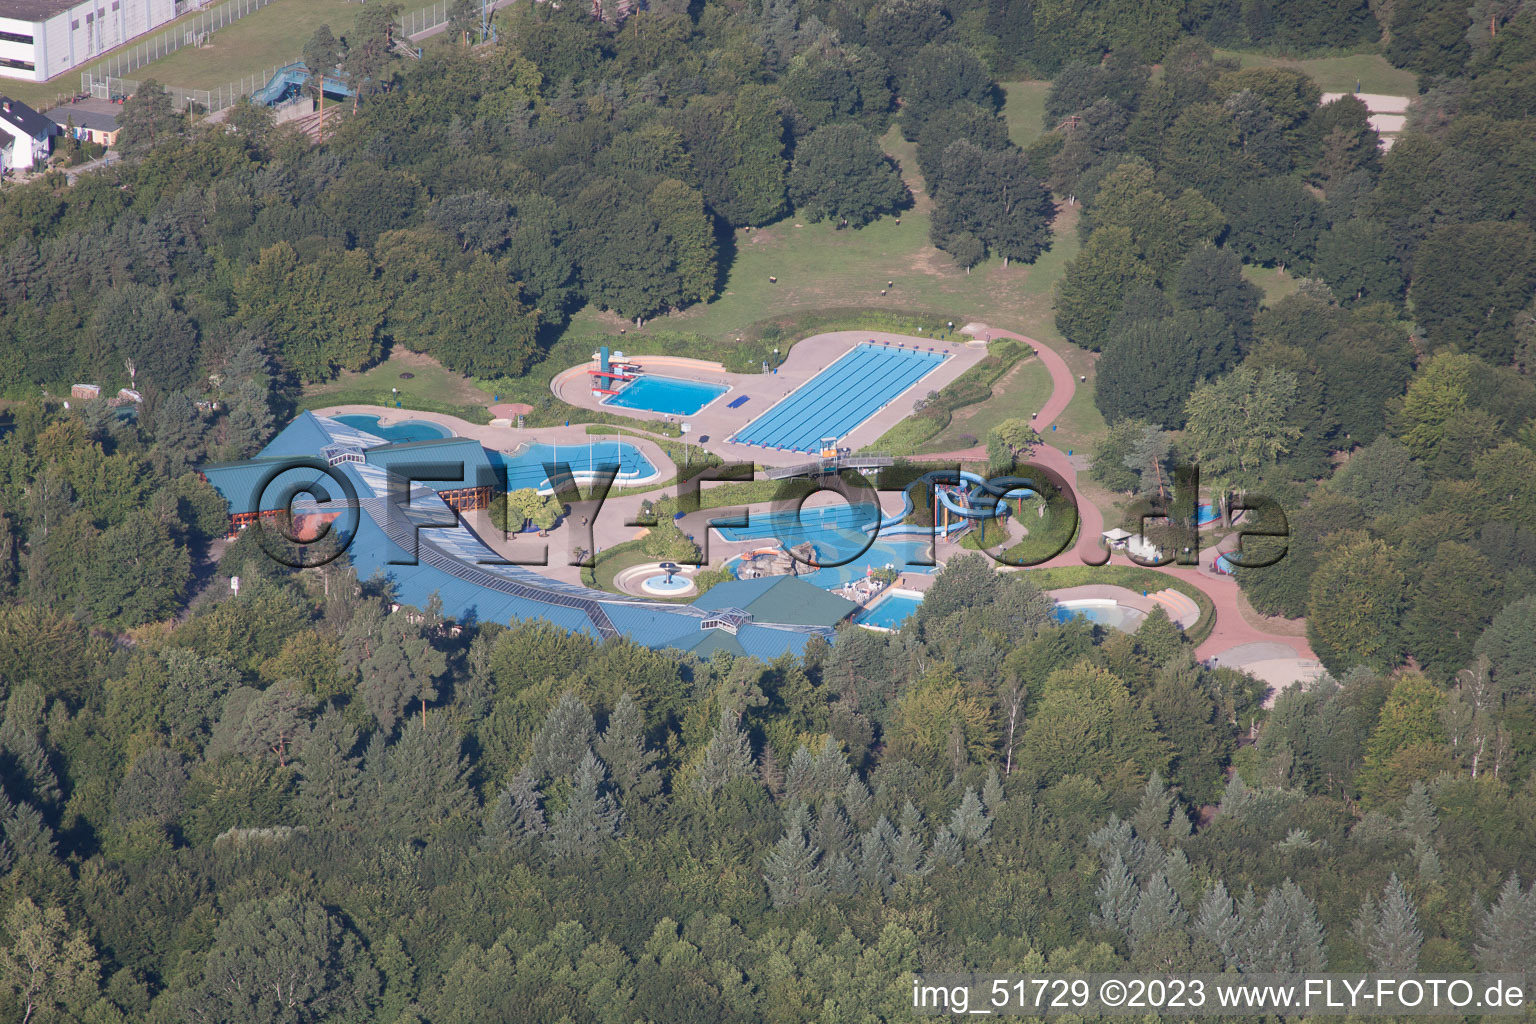 Aerial photograpy of Bathing park in Wörth am Rhein in the state Rhineland-Palatinate, Germany